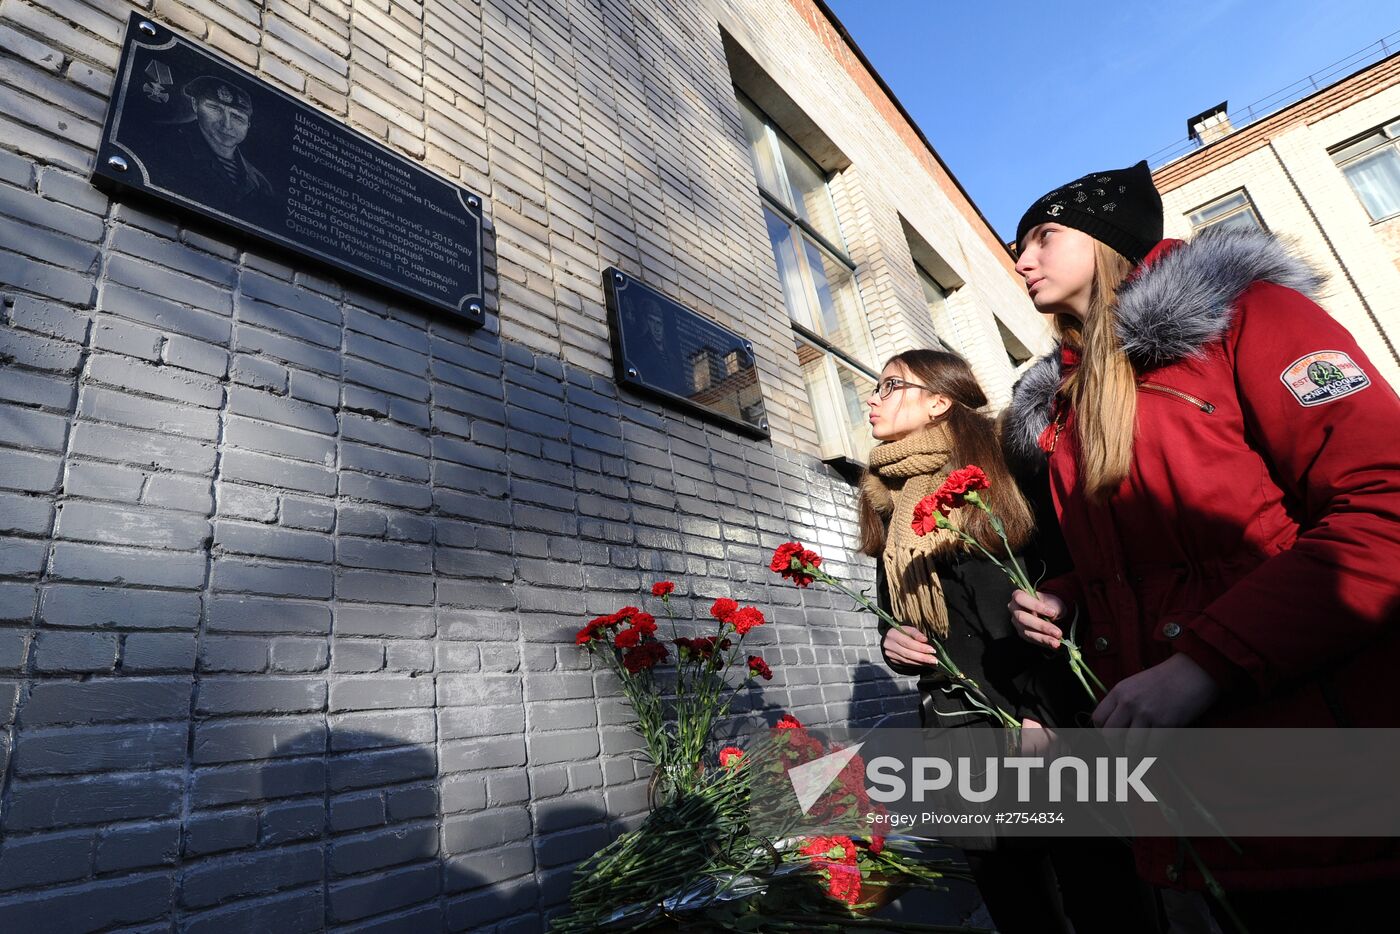 Unveliling of plaque in memory of marine Alexander Pozynich